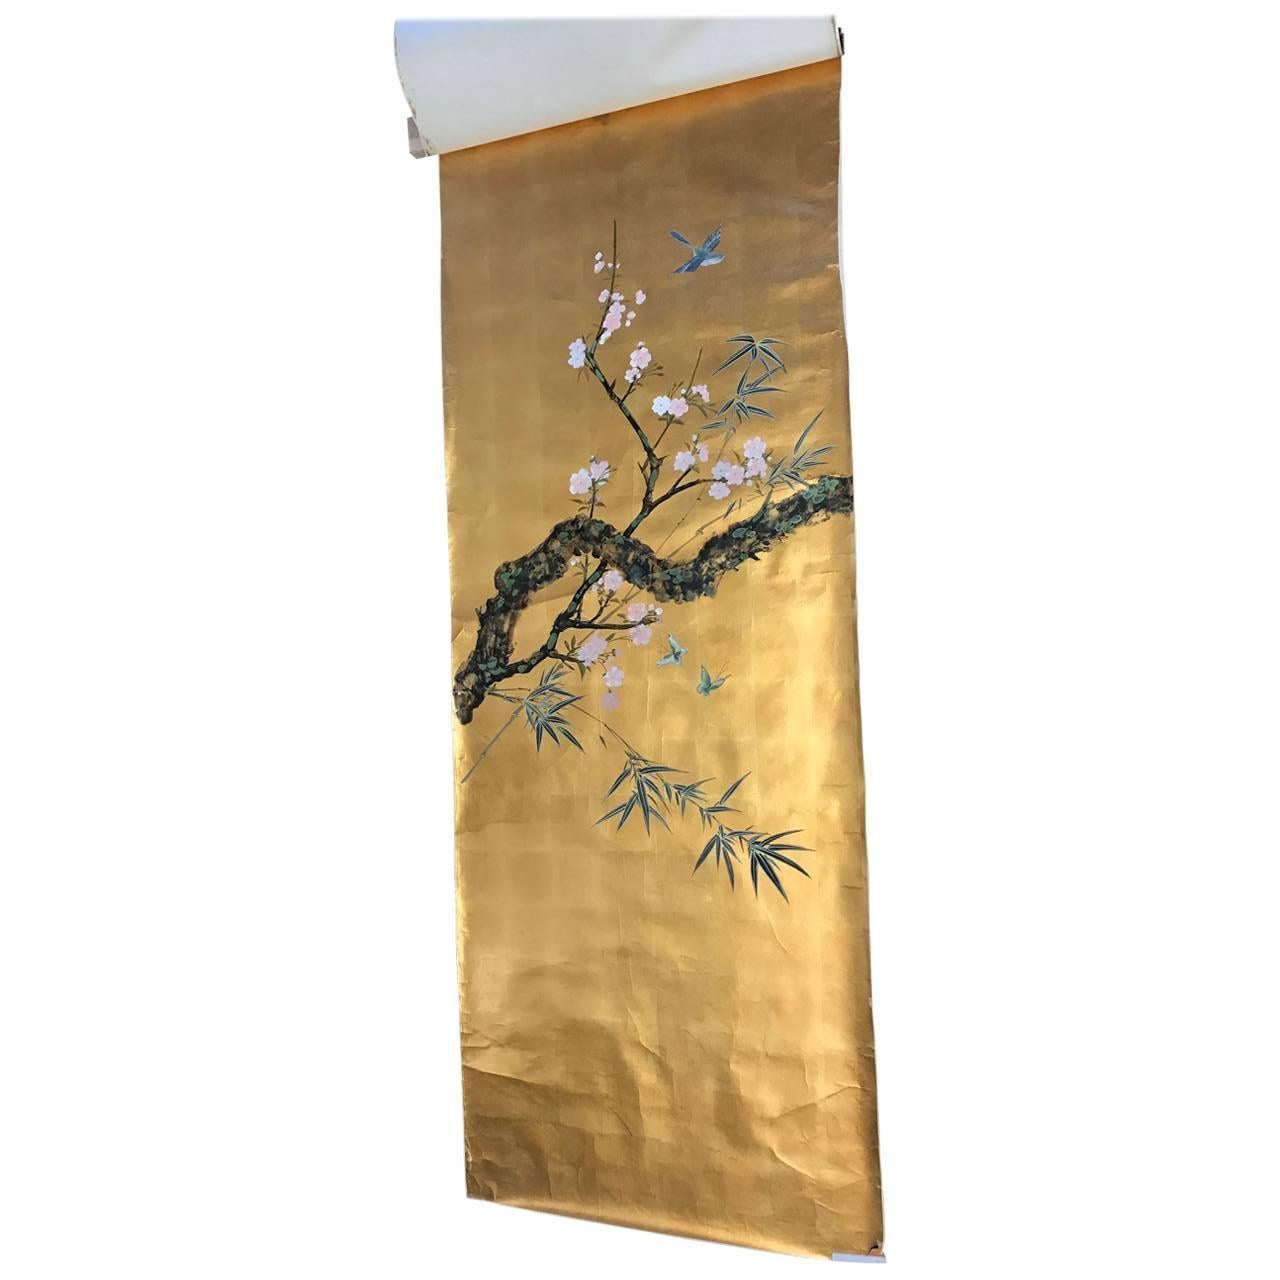 The four panels were hand decorated in New York City the 1980's. The background material was made in Gracie studio in Hong Kong. 
The hand leafed gilded wallpapers are adorned with blooming cherry blossom tree and three vibrantly colored birds.